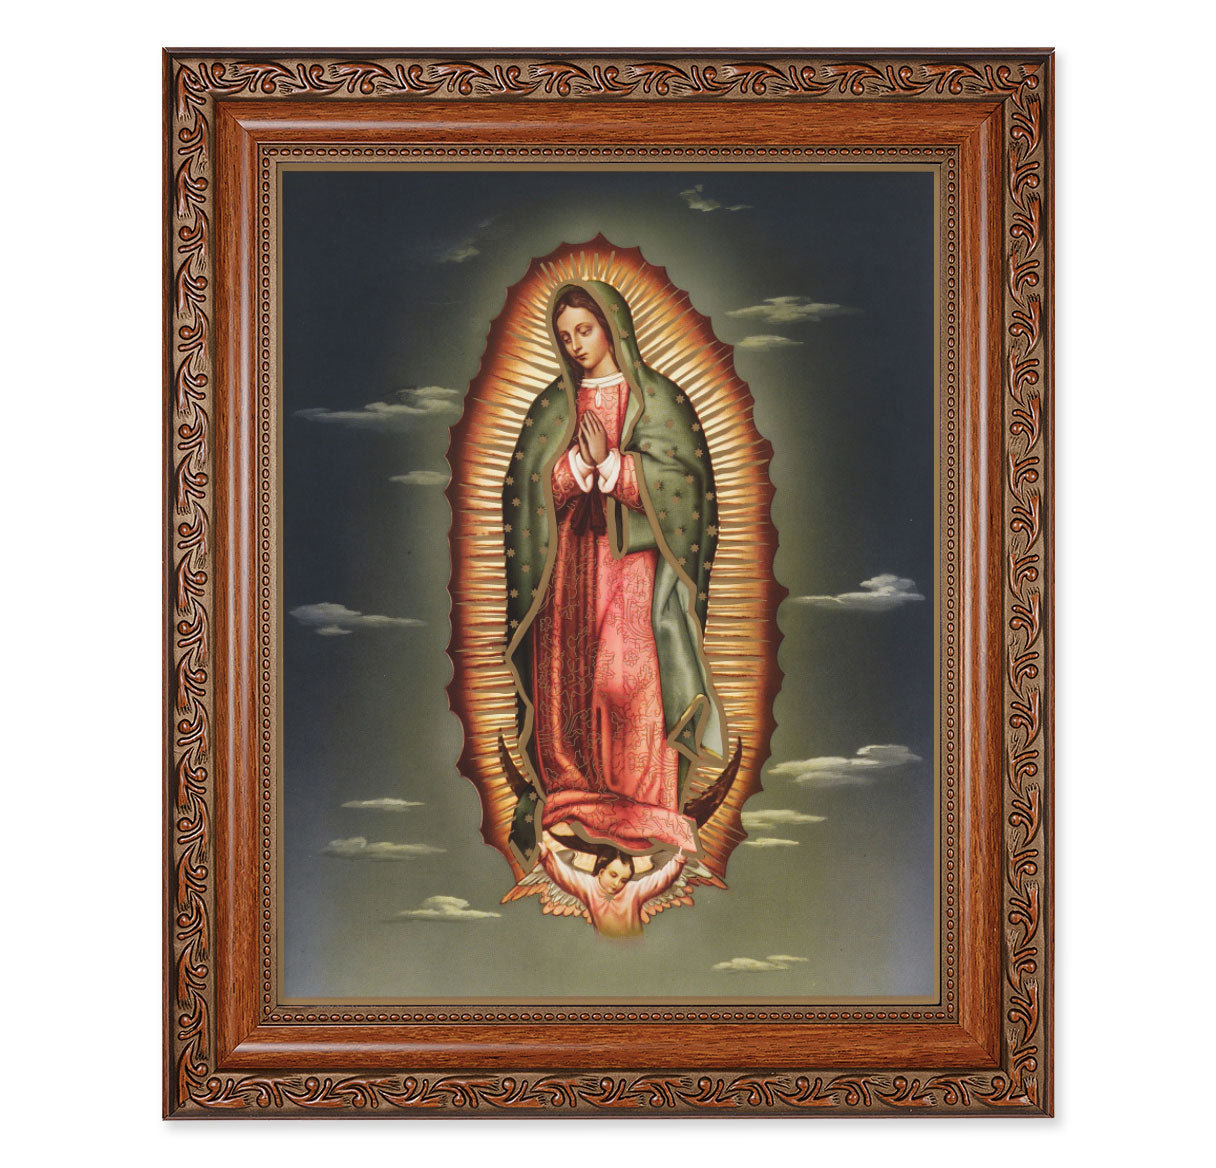 Our Lady of Guadalupe Mahogany Finished Framed Art